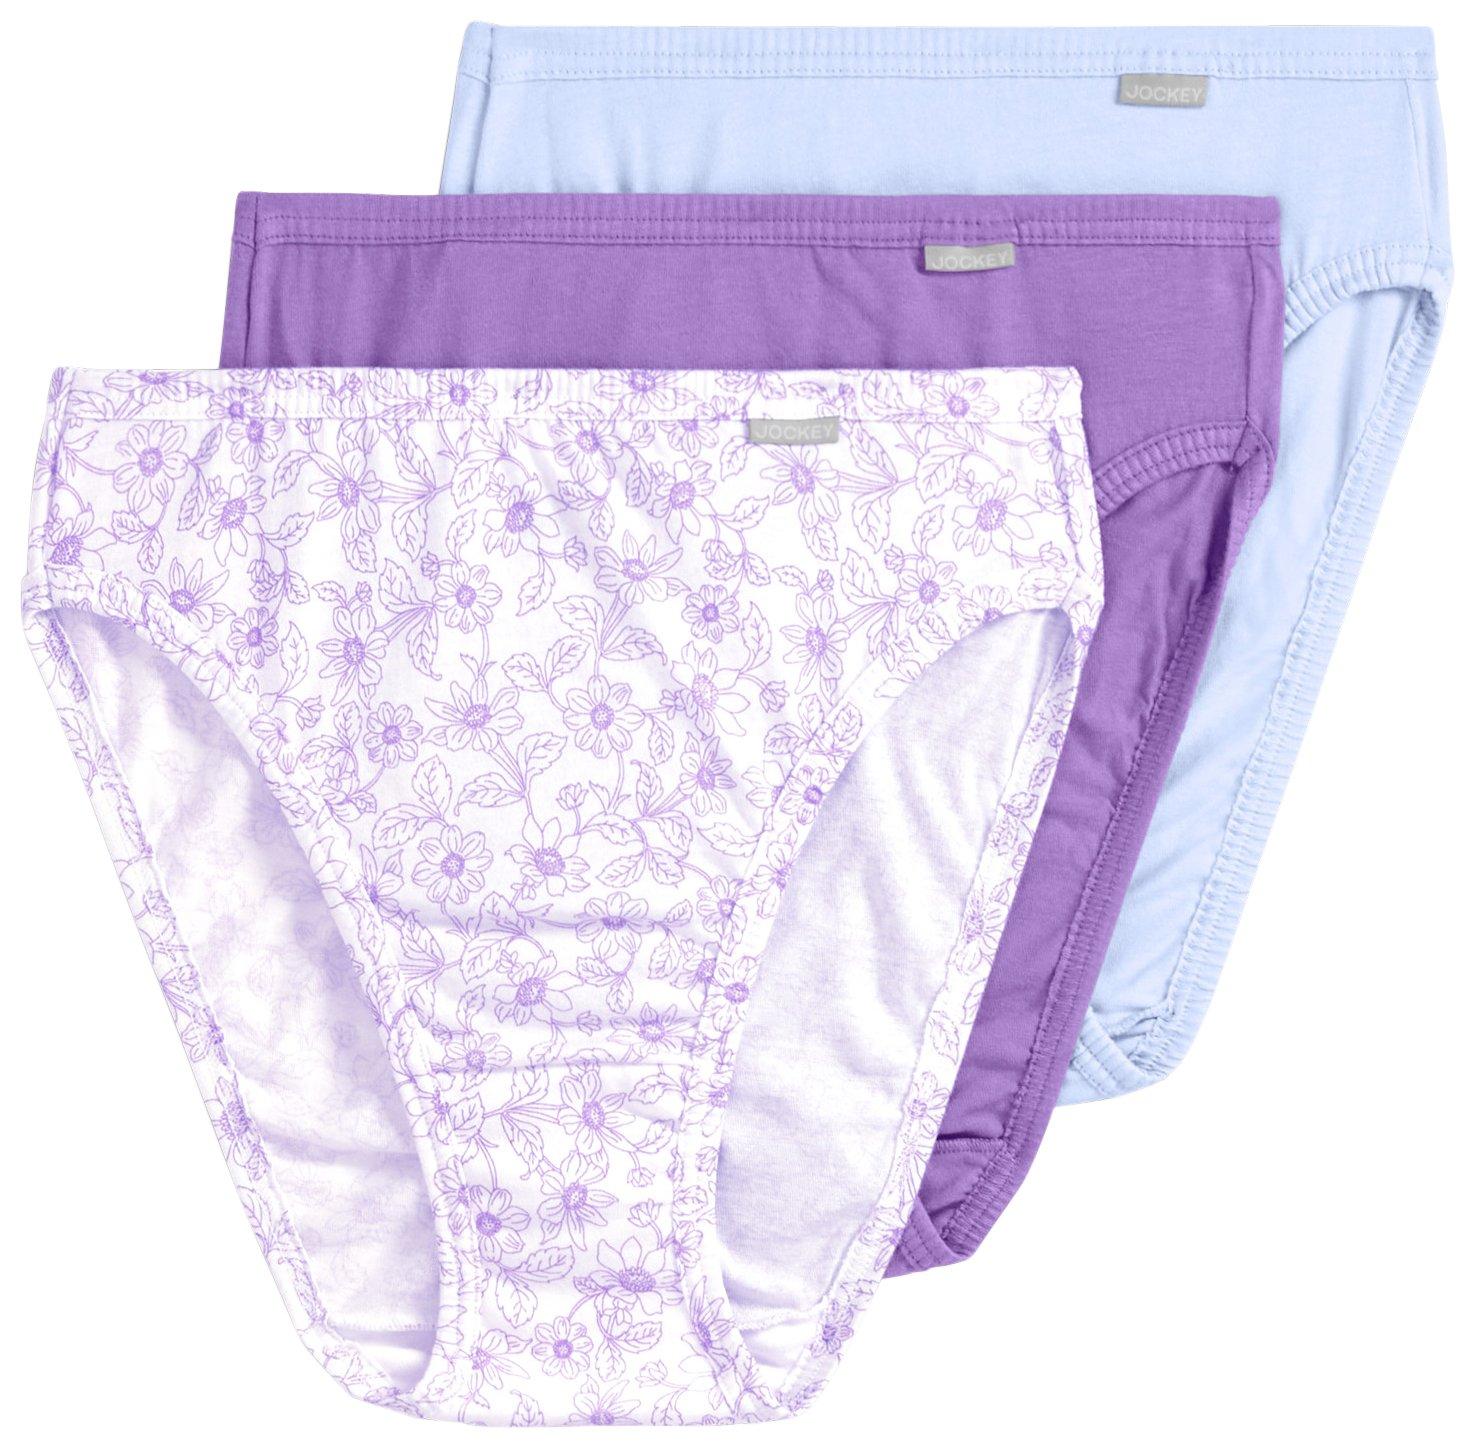 Hanes ComfortSoft Cotton High-Cut Panties - Package of 6